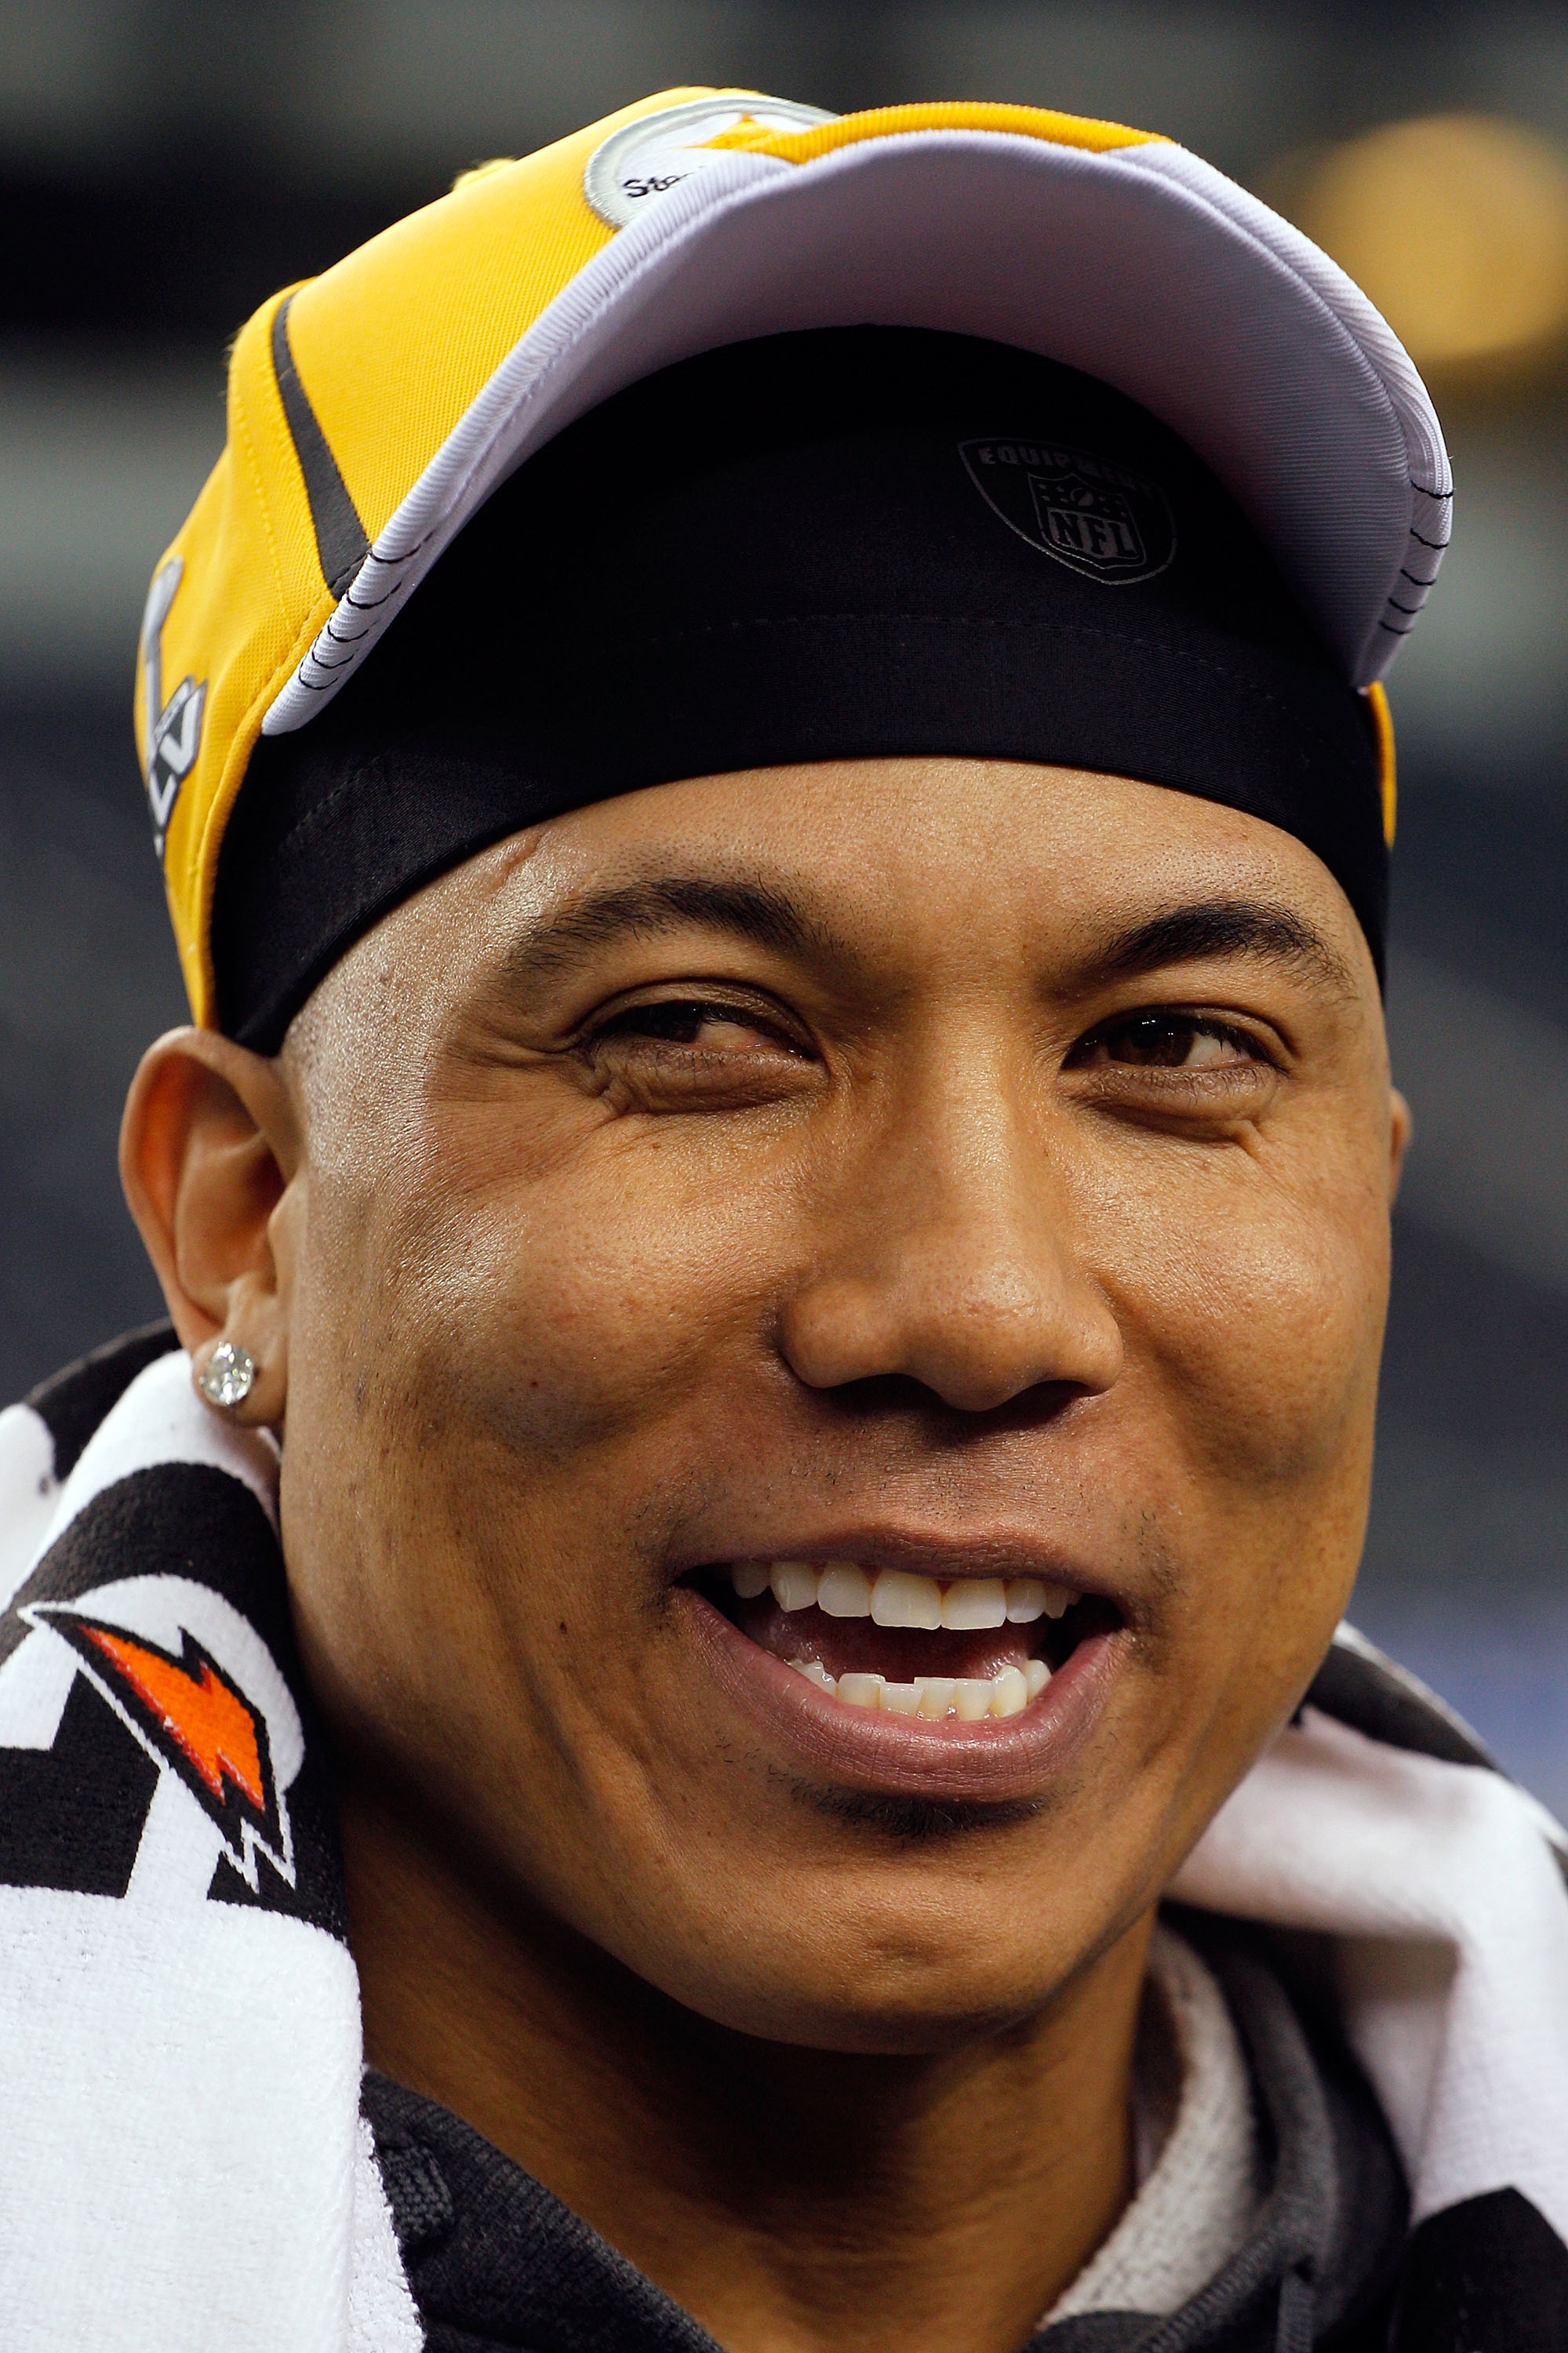 ARLINGTON, TX - FEBRUARY 01:  Hines Ward #86 of the Pittsburgh Steelers smiles during Super Bowl XLV Media Day ahead of Super Bowl XLV at Cowboys Stadium on February 1, 2011 in Arlington, Texas. The Pittsburgh Steelers will play the Green Bay Packers in S